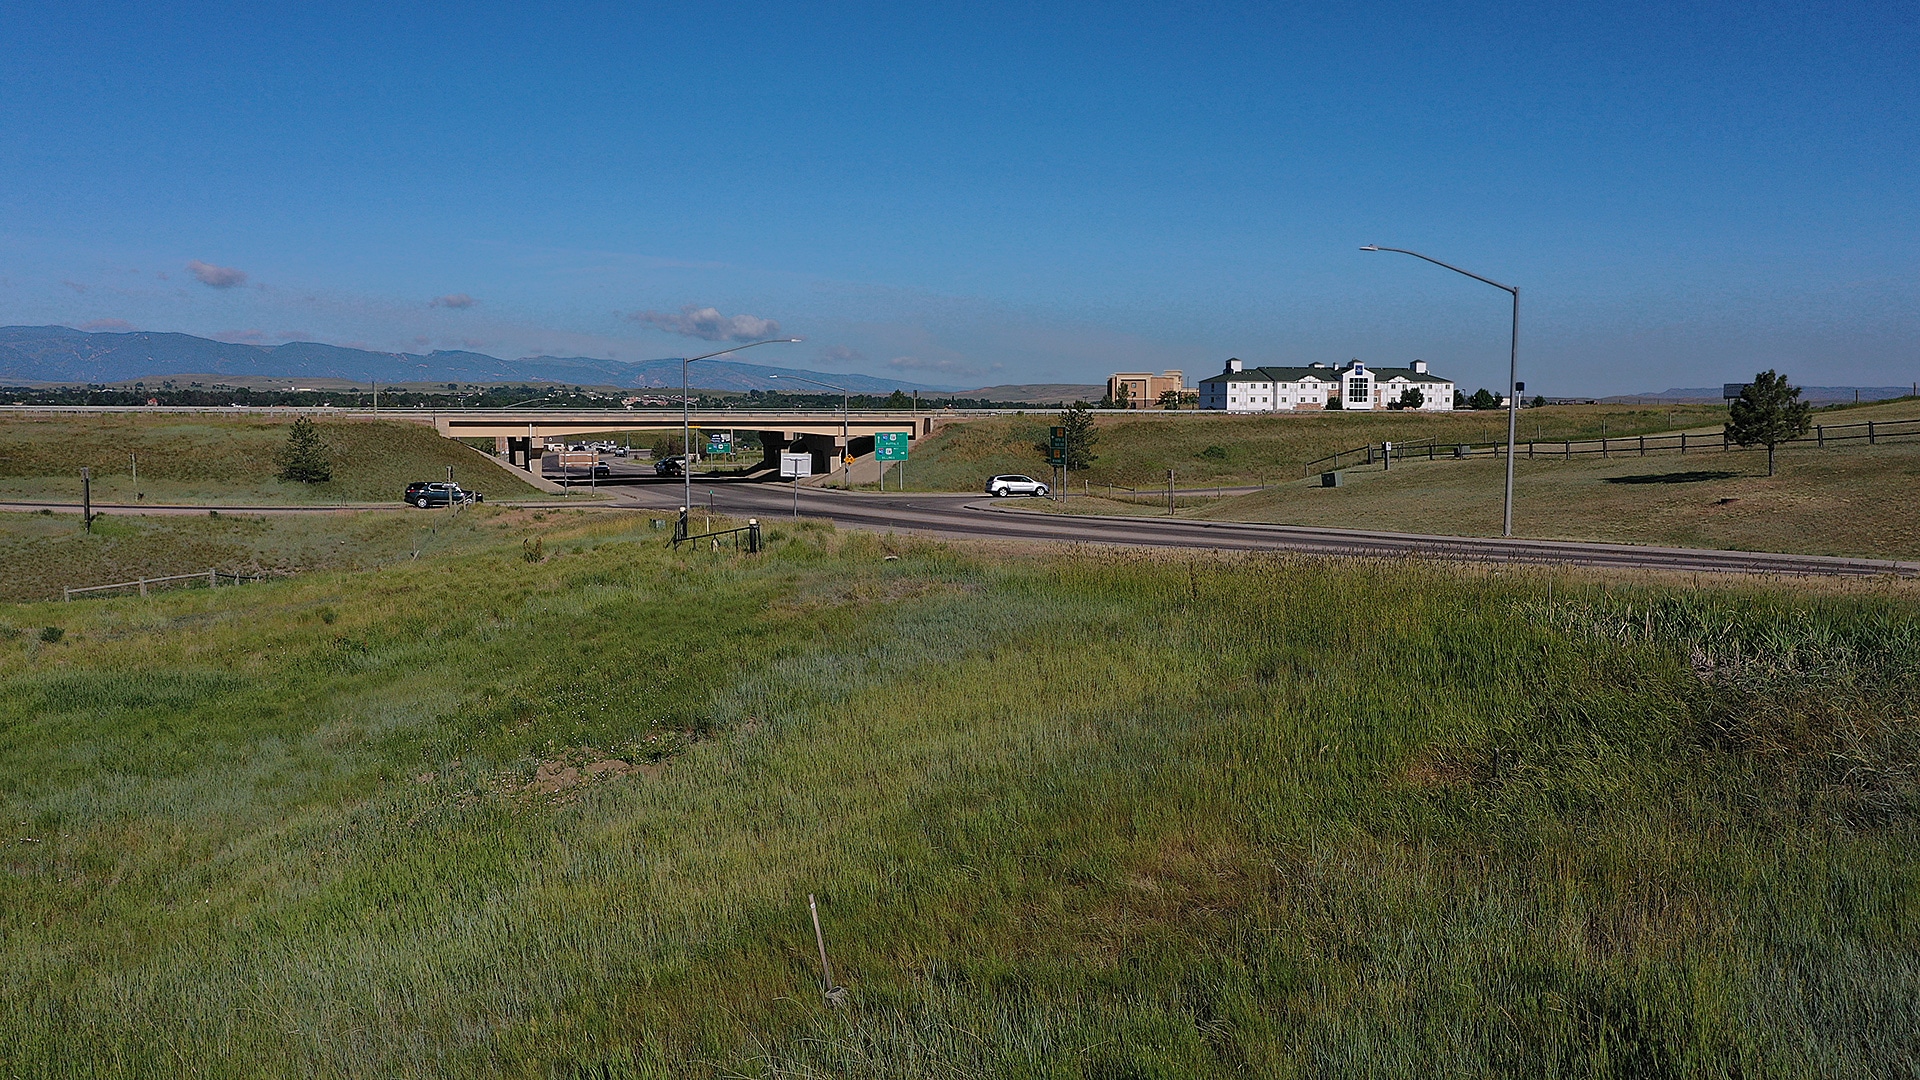 1 acre commercial lots for sale adjacent to Interstate 90 off ramp in Sheridan Wyoming